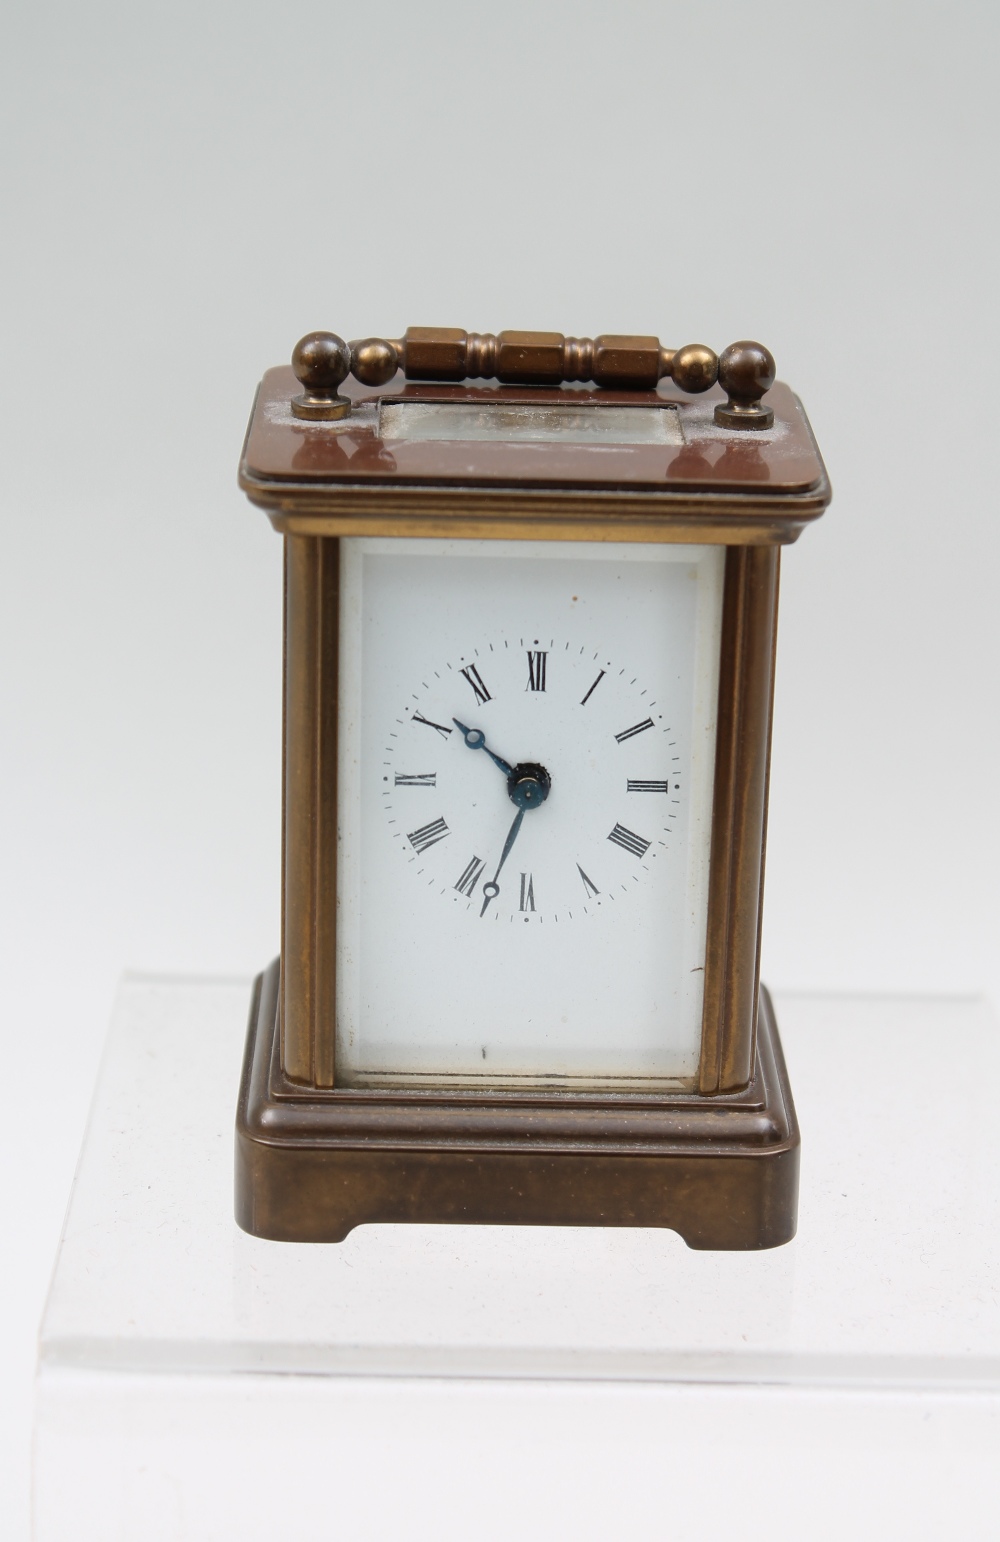 A miniature brass carriage clock, enamel dial with Roman numerals.